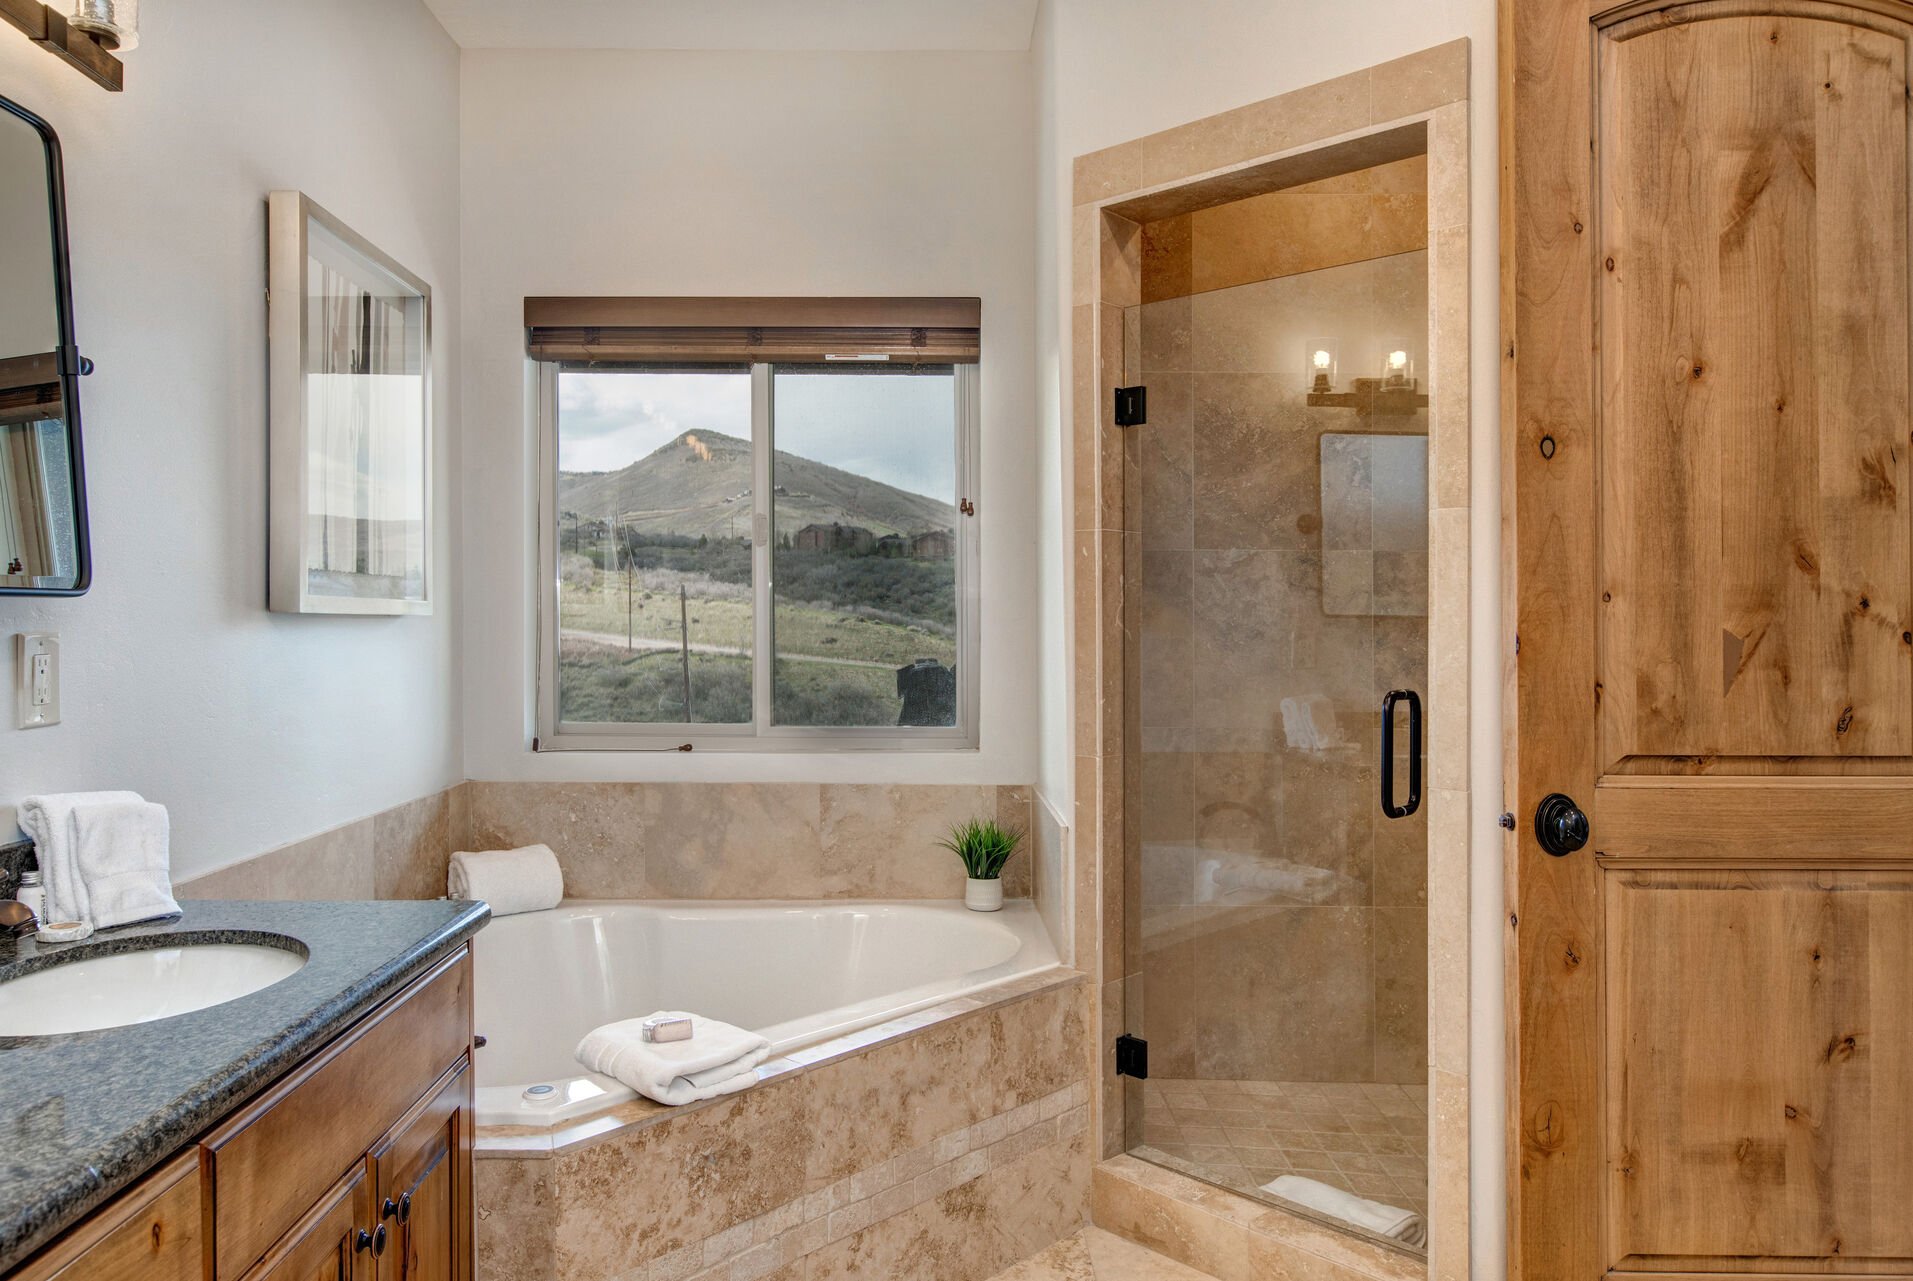 Jetted Tub and Separate Shower with Sweet Views